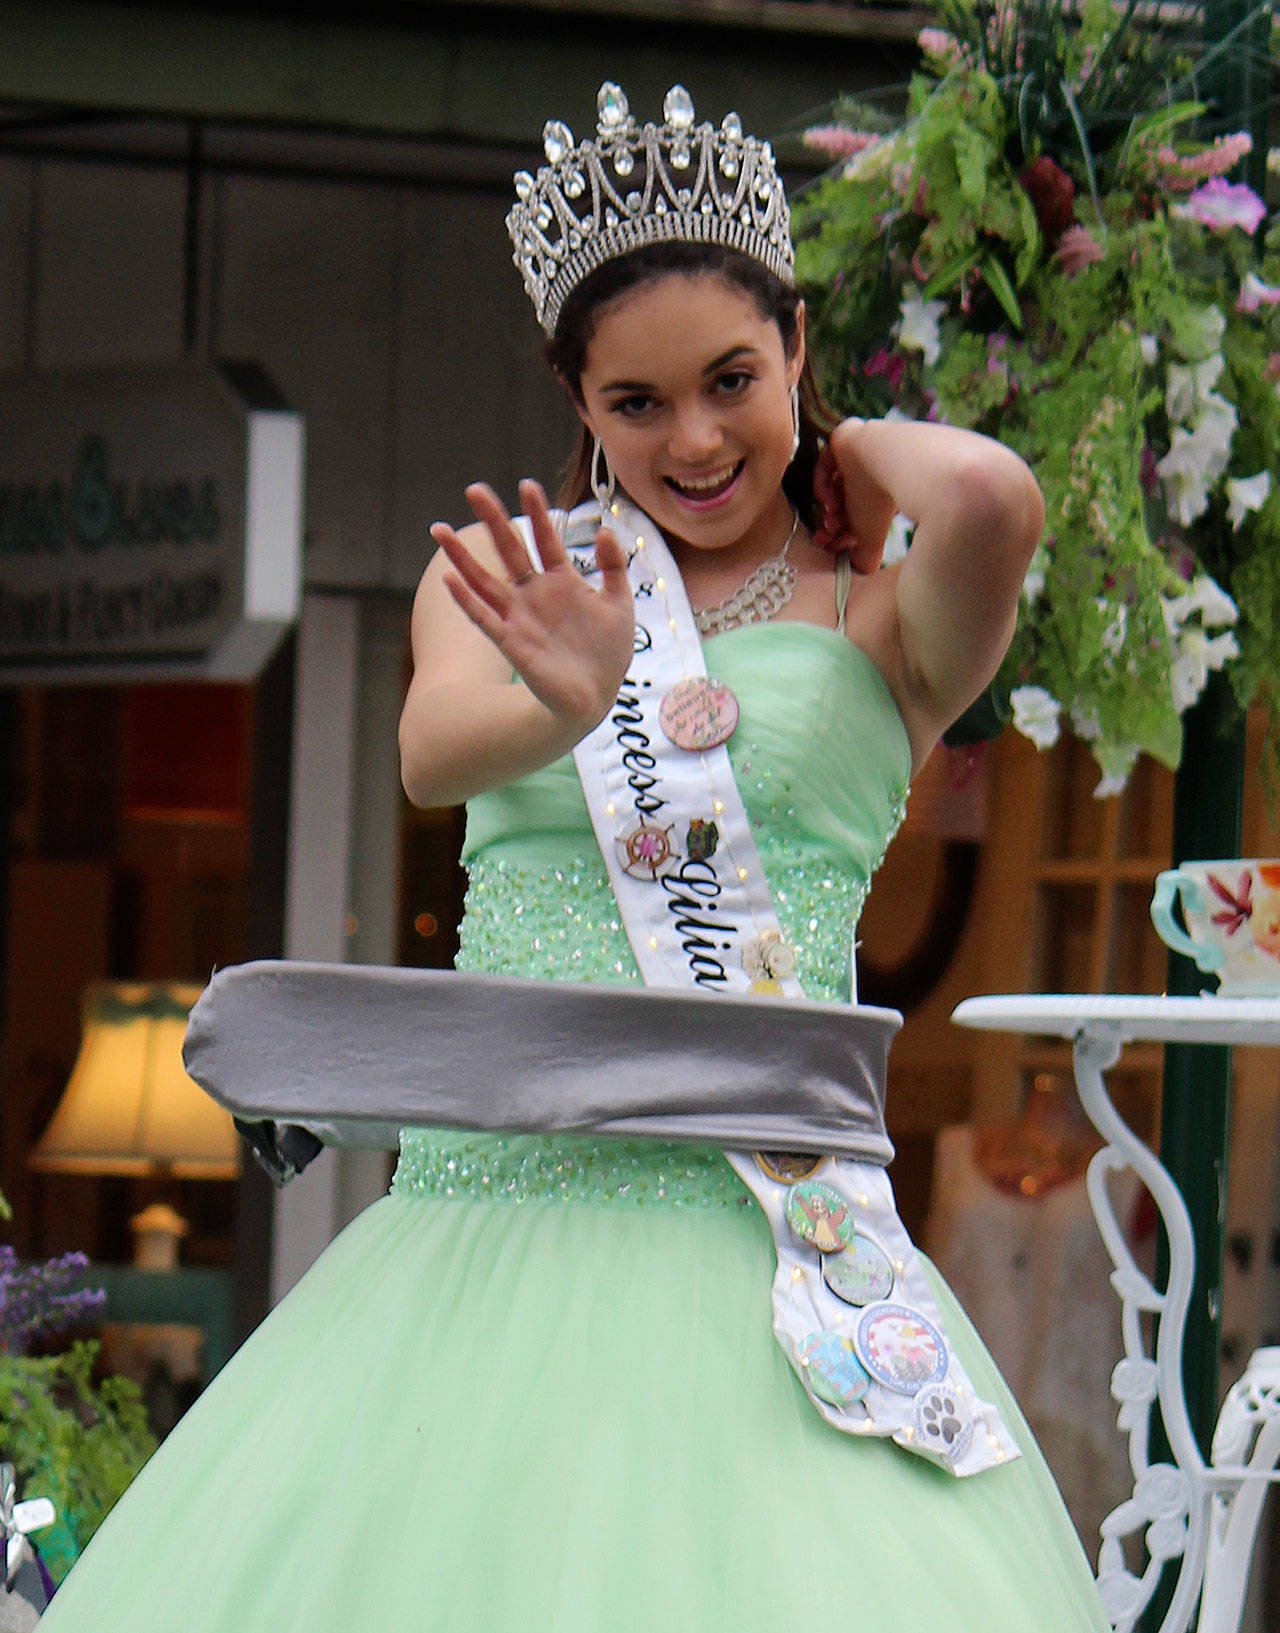 The Sequim Irrigation Festival Float was the winner of the Mayor’s Community Festival Float Award. Princess Liliana Williams waves to the crowd during the Fathoms parade. (Bob Smith | Kitsap Daily News photo)